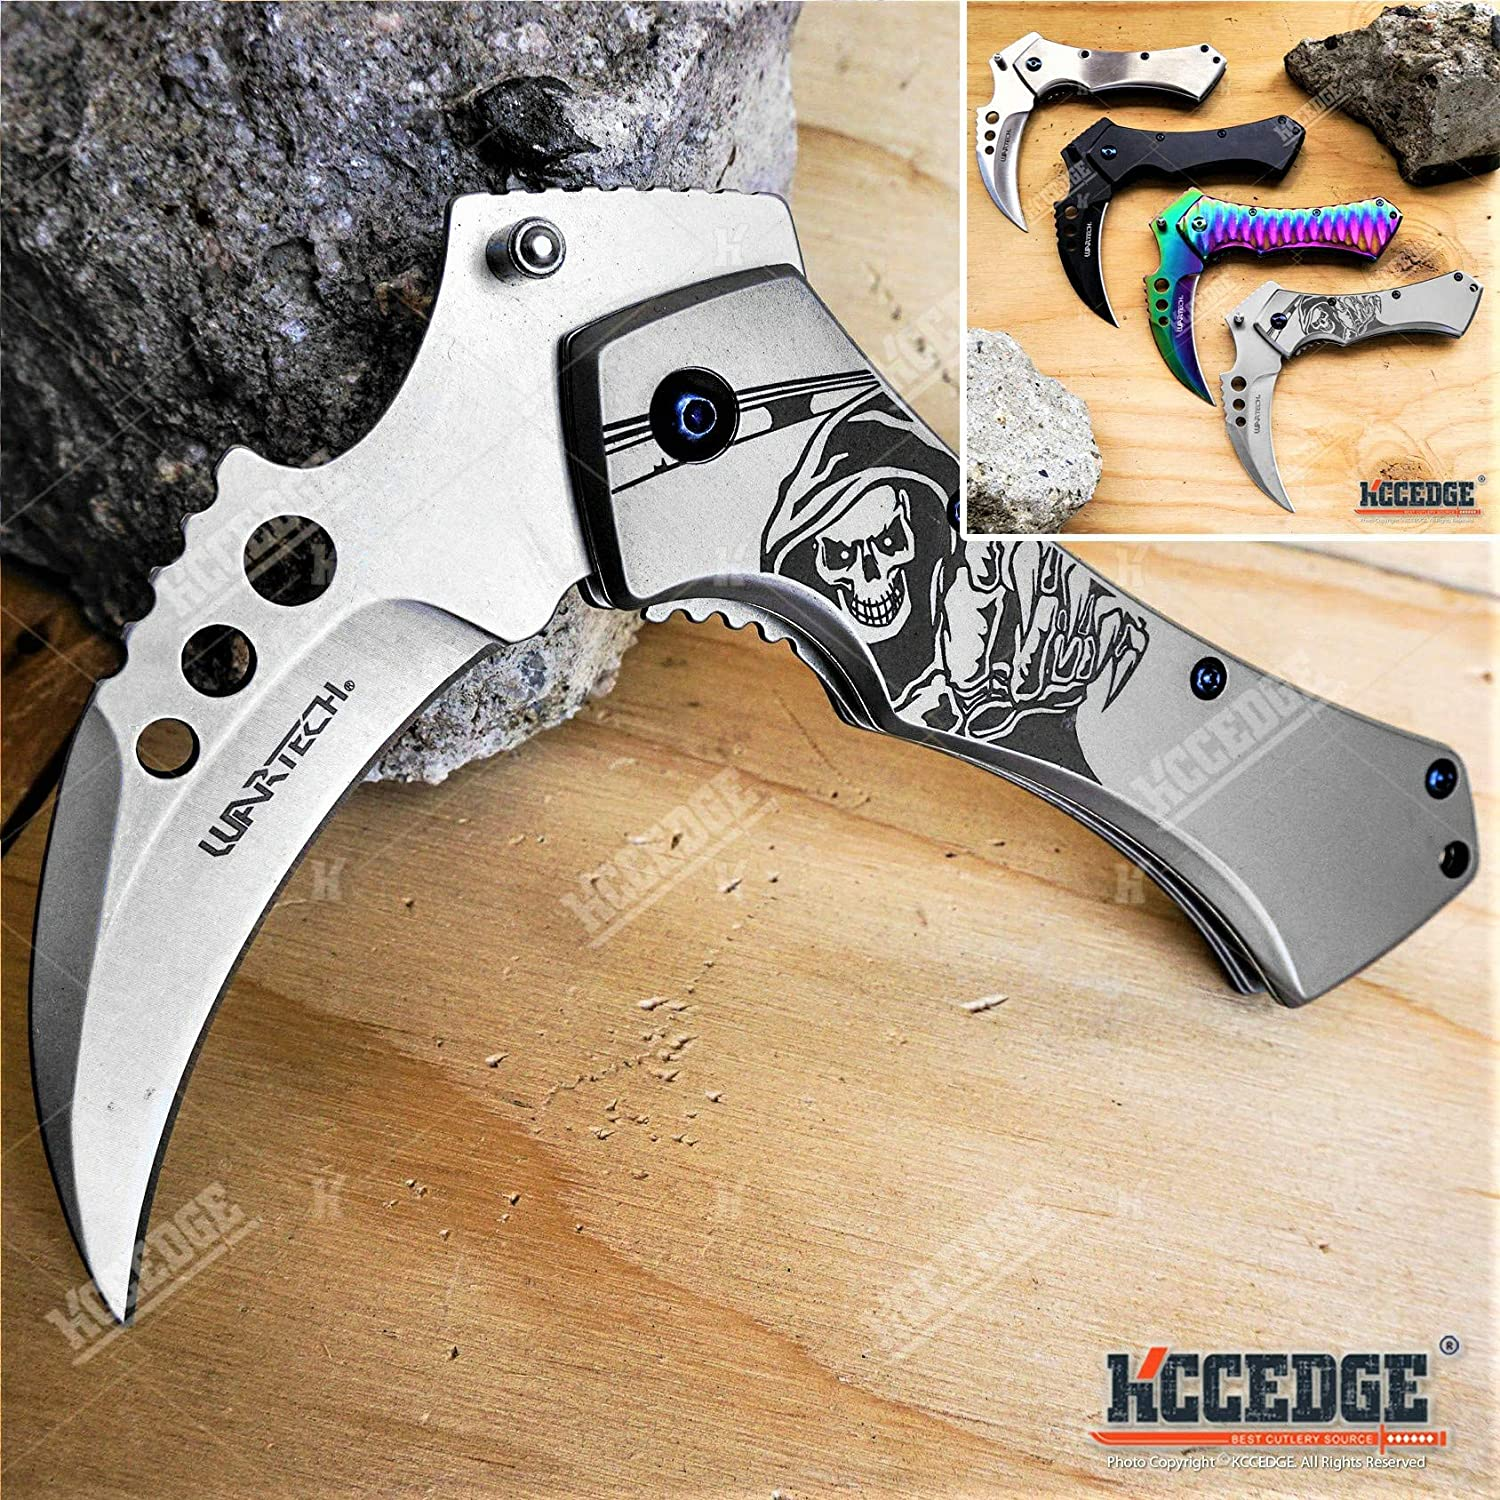 ]Pocket Knife Camping Accessories Survival Kit 5 Inch Grim Reaper Scythe Tactical Knife Hunting Knife Camping Gear